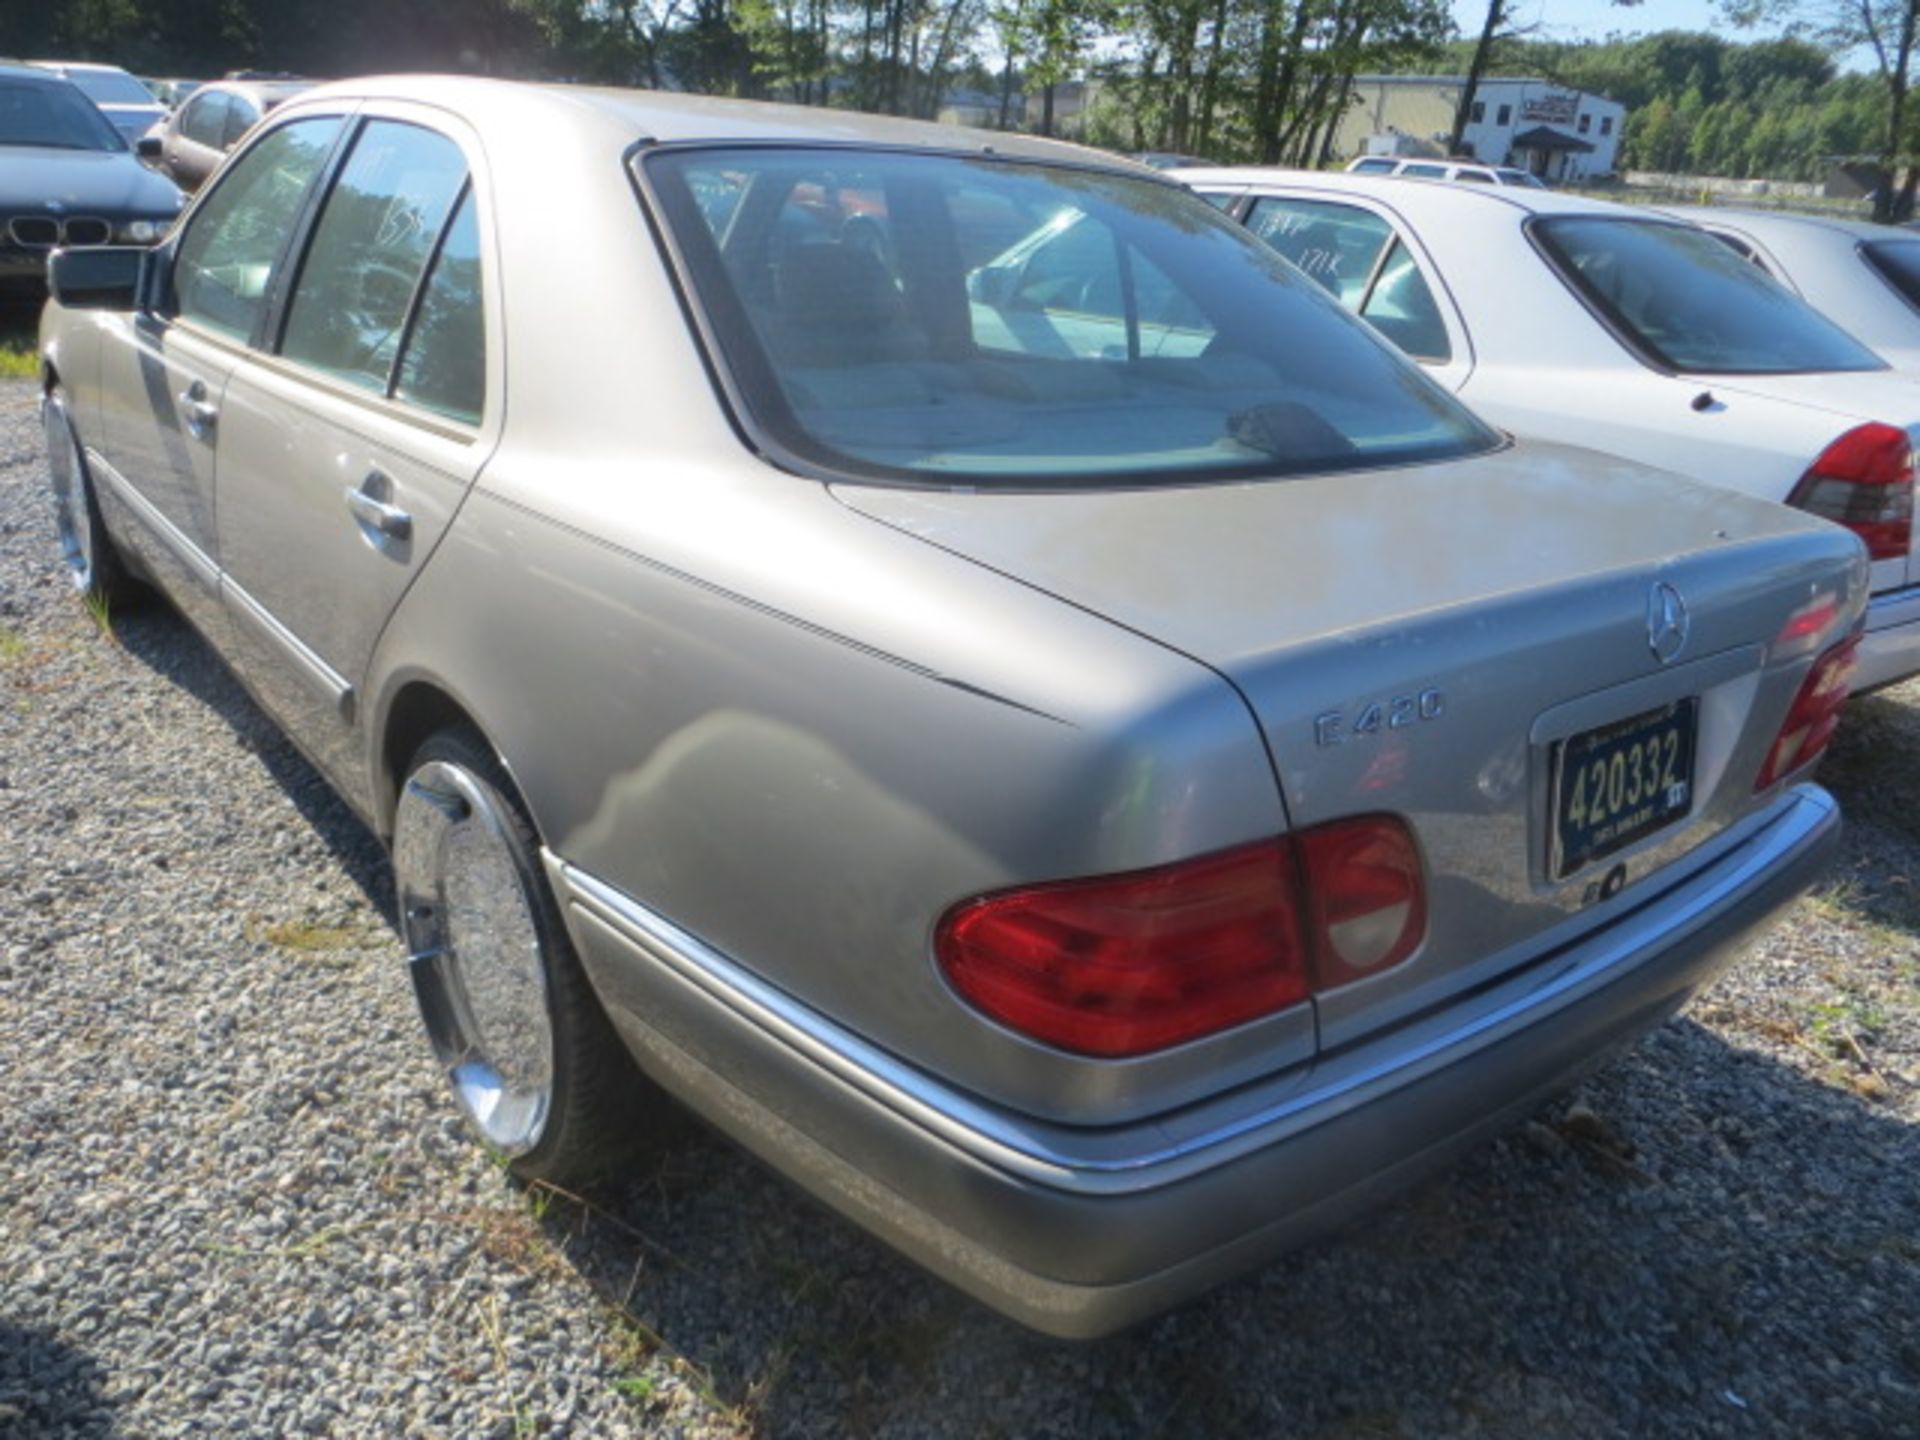 1997 Mercedes Benz E420-NEEDS HEATER HOSE 189000 MILES,VIN WDBJF72F8VA305016, SOLD WITH GOOD TRANSFE - Image 3 of 4